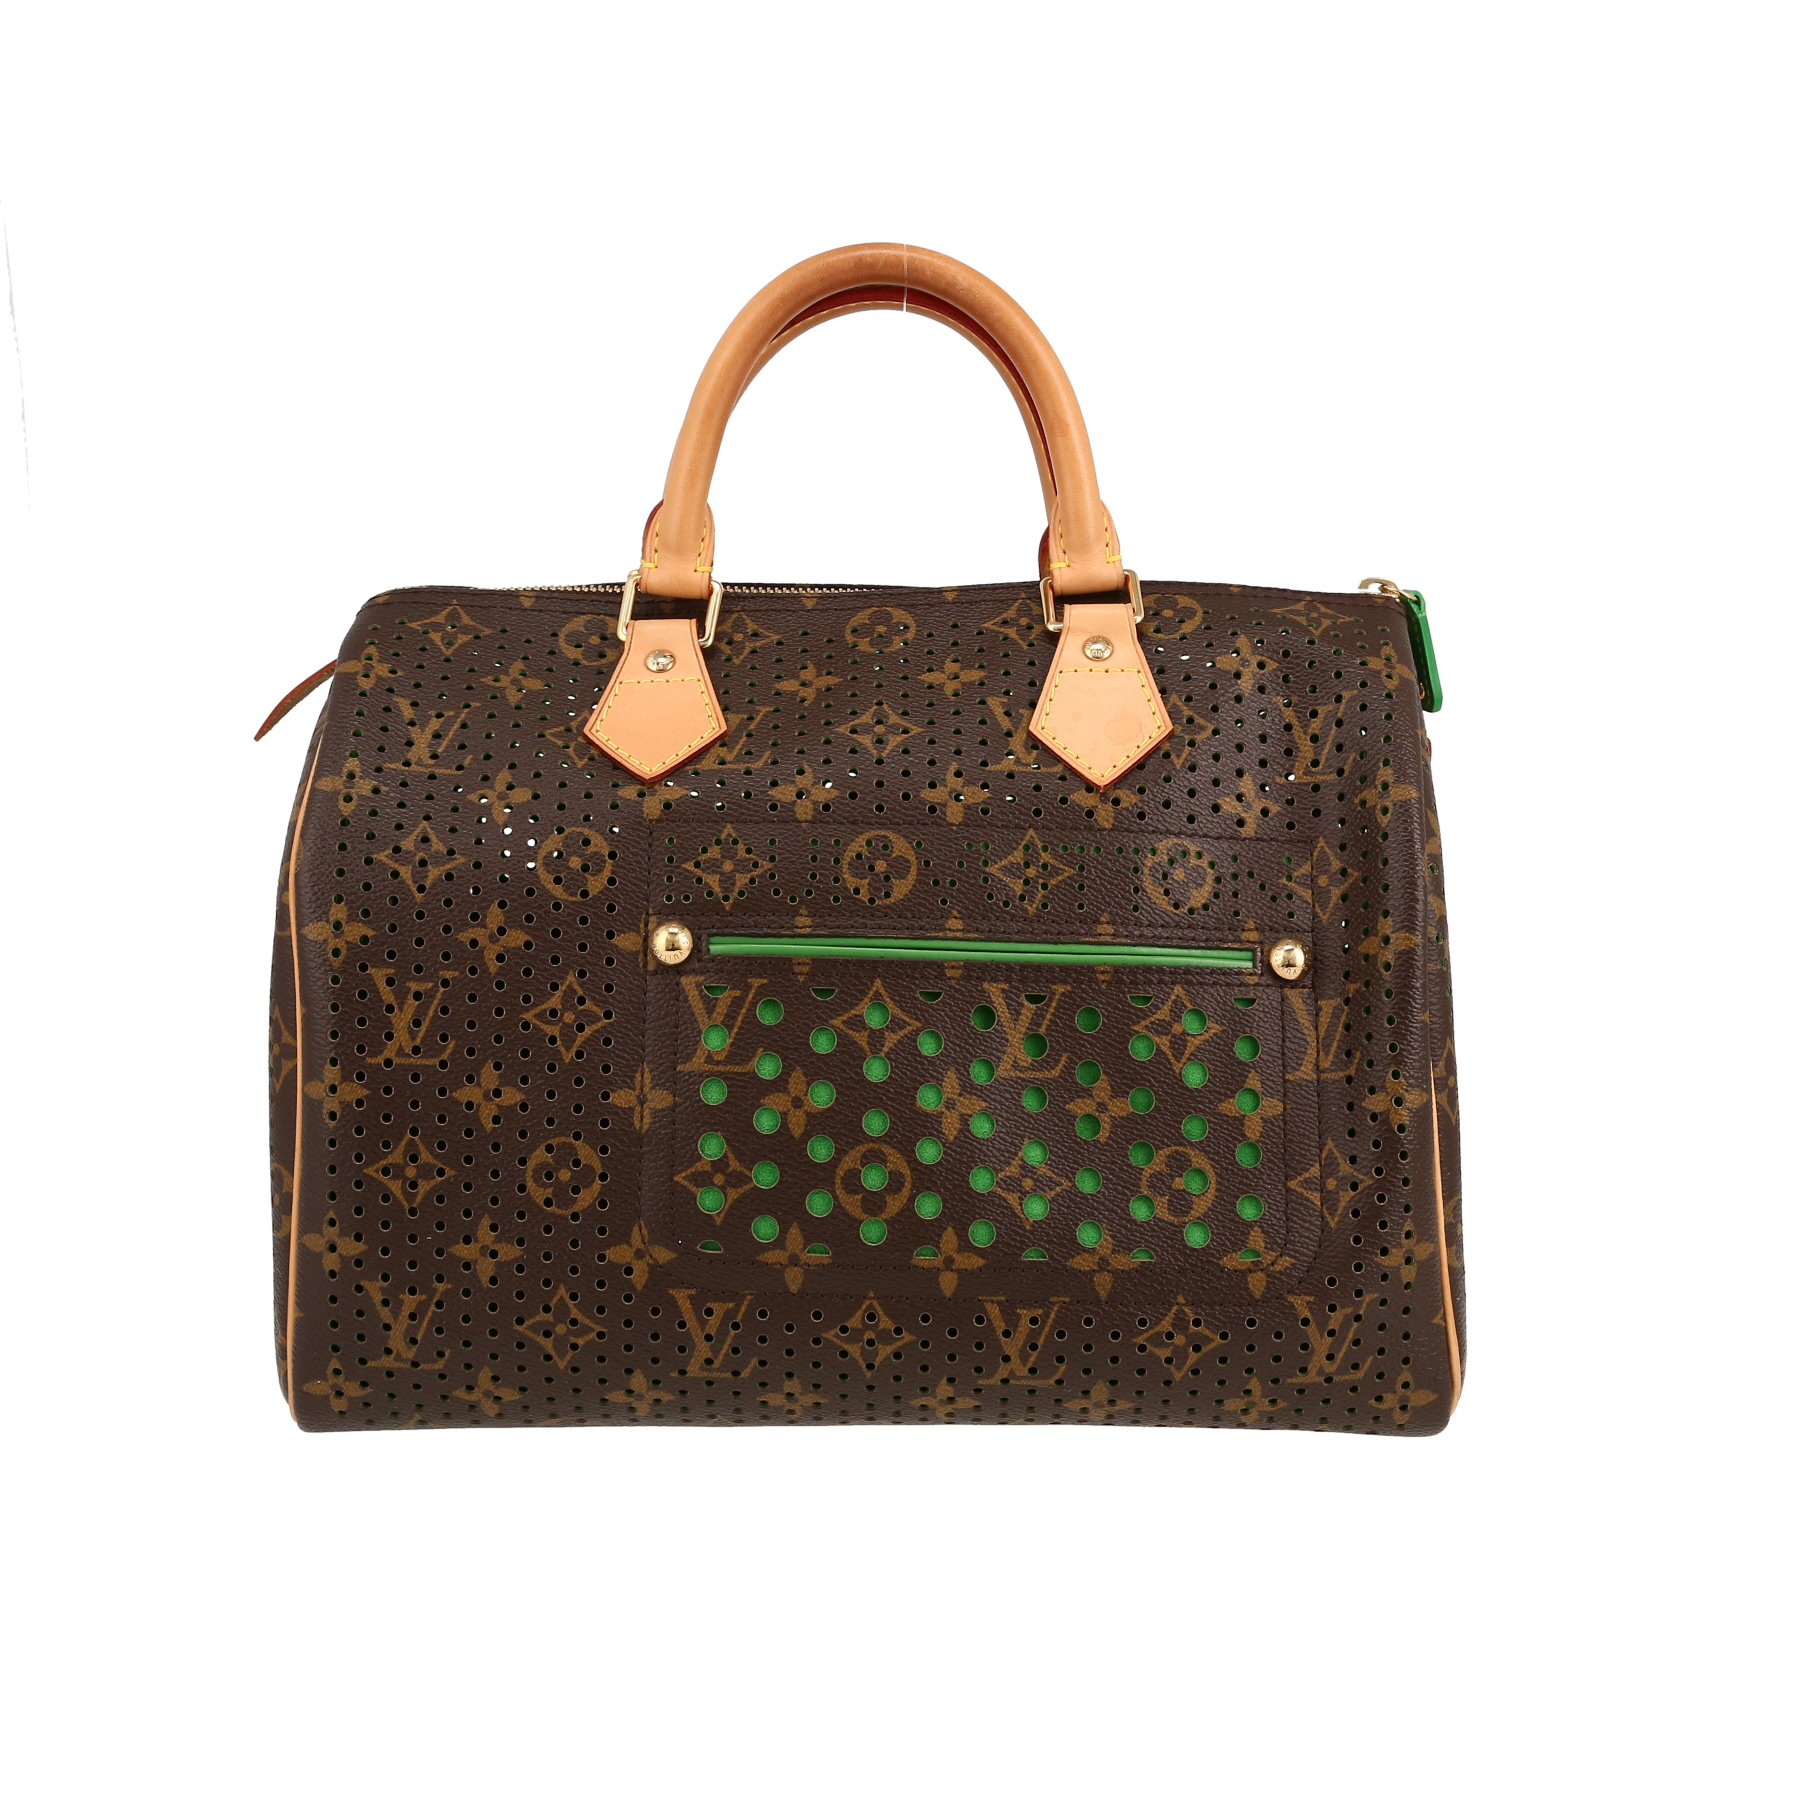 Speedy Editions Limitées Handbag In Brown And